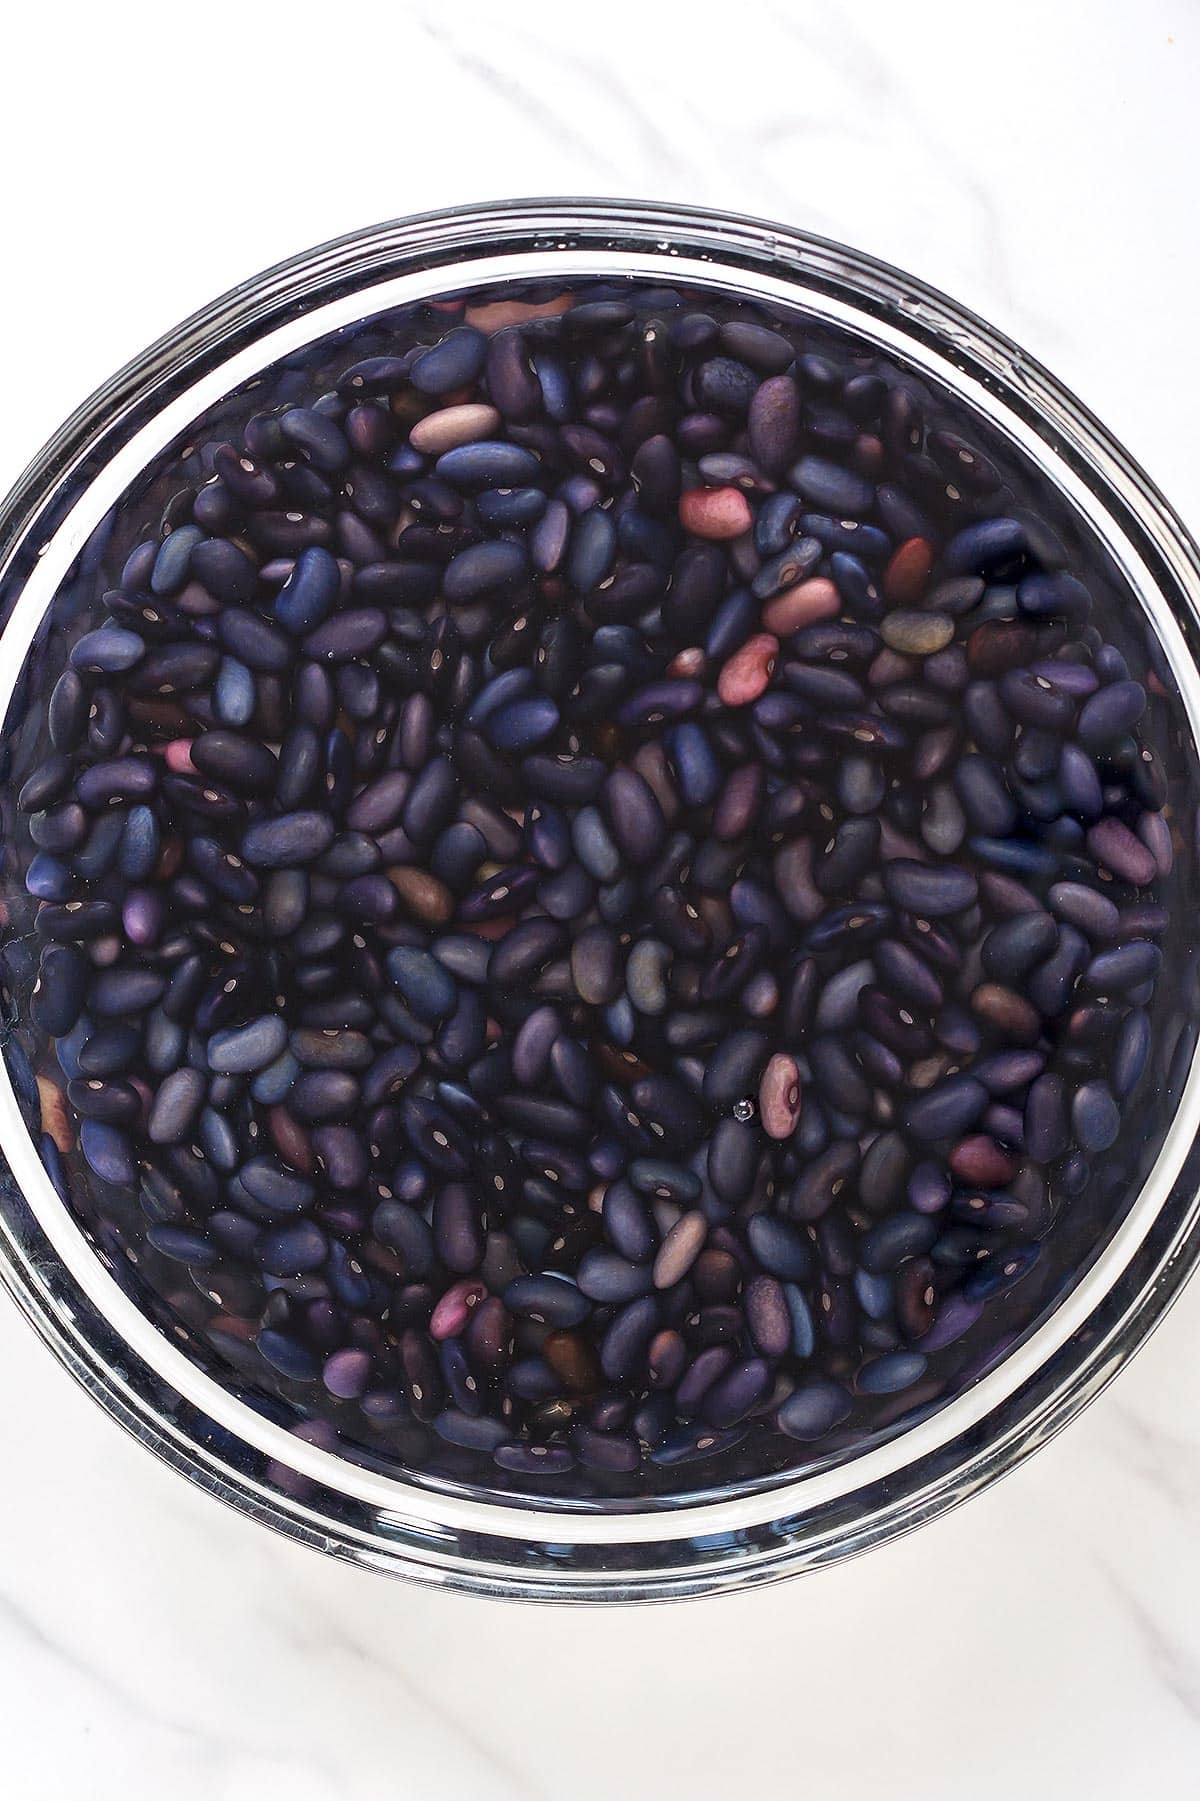 Soaked black beans in water